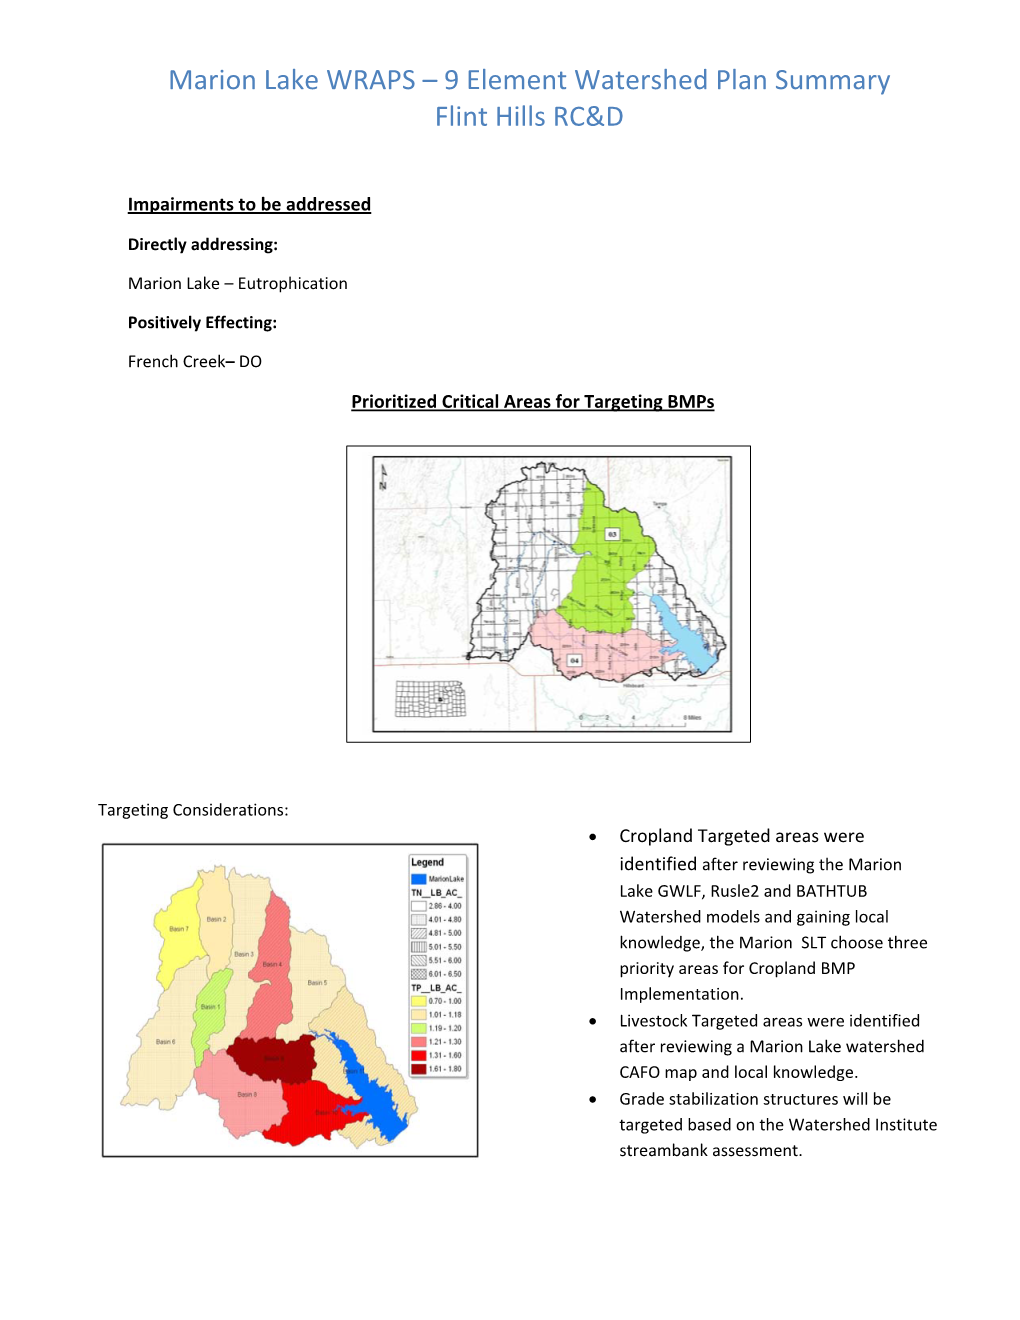 Marion Lake WRAPS – 9 Element Watershed Plan Summary Flint Hills RC&D